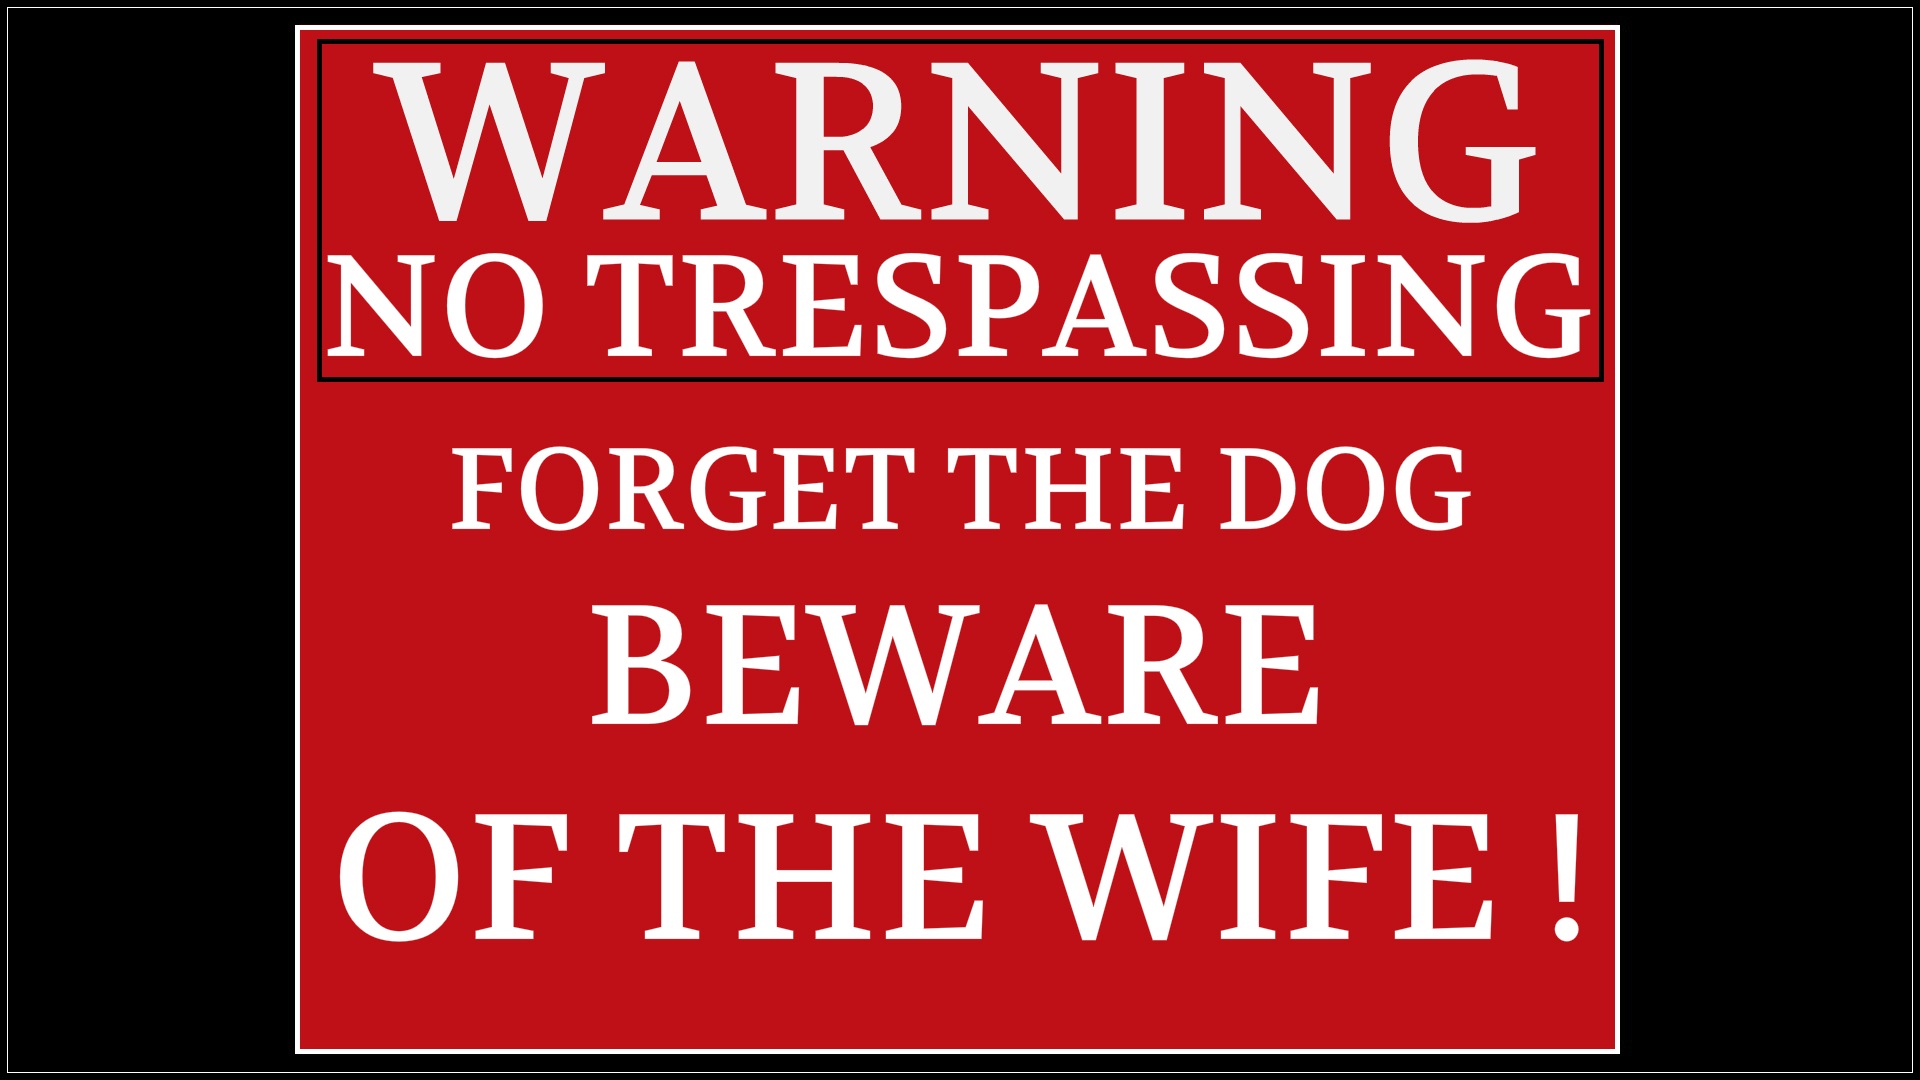 misc, sign, funny, humor, red, warning Full HD